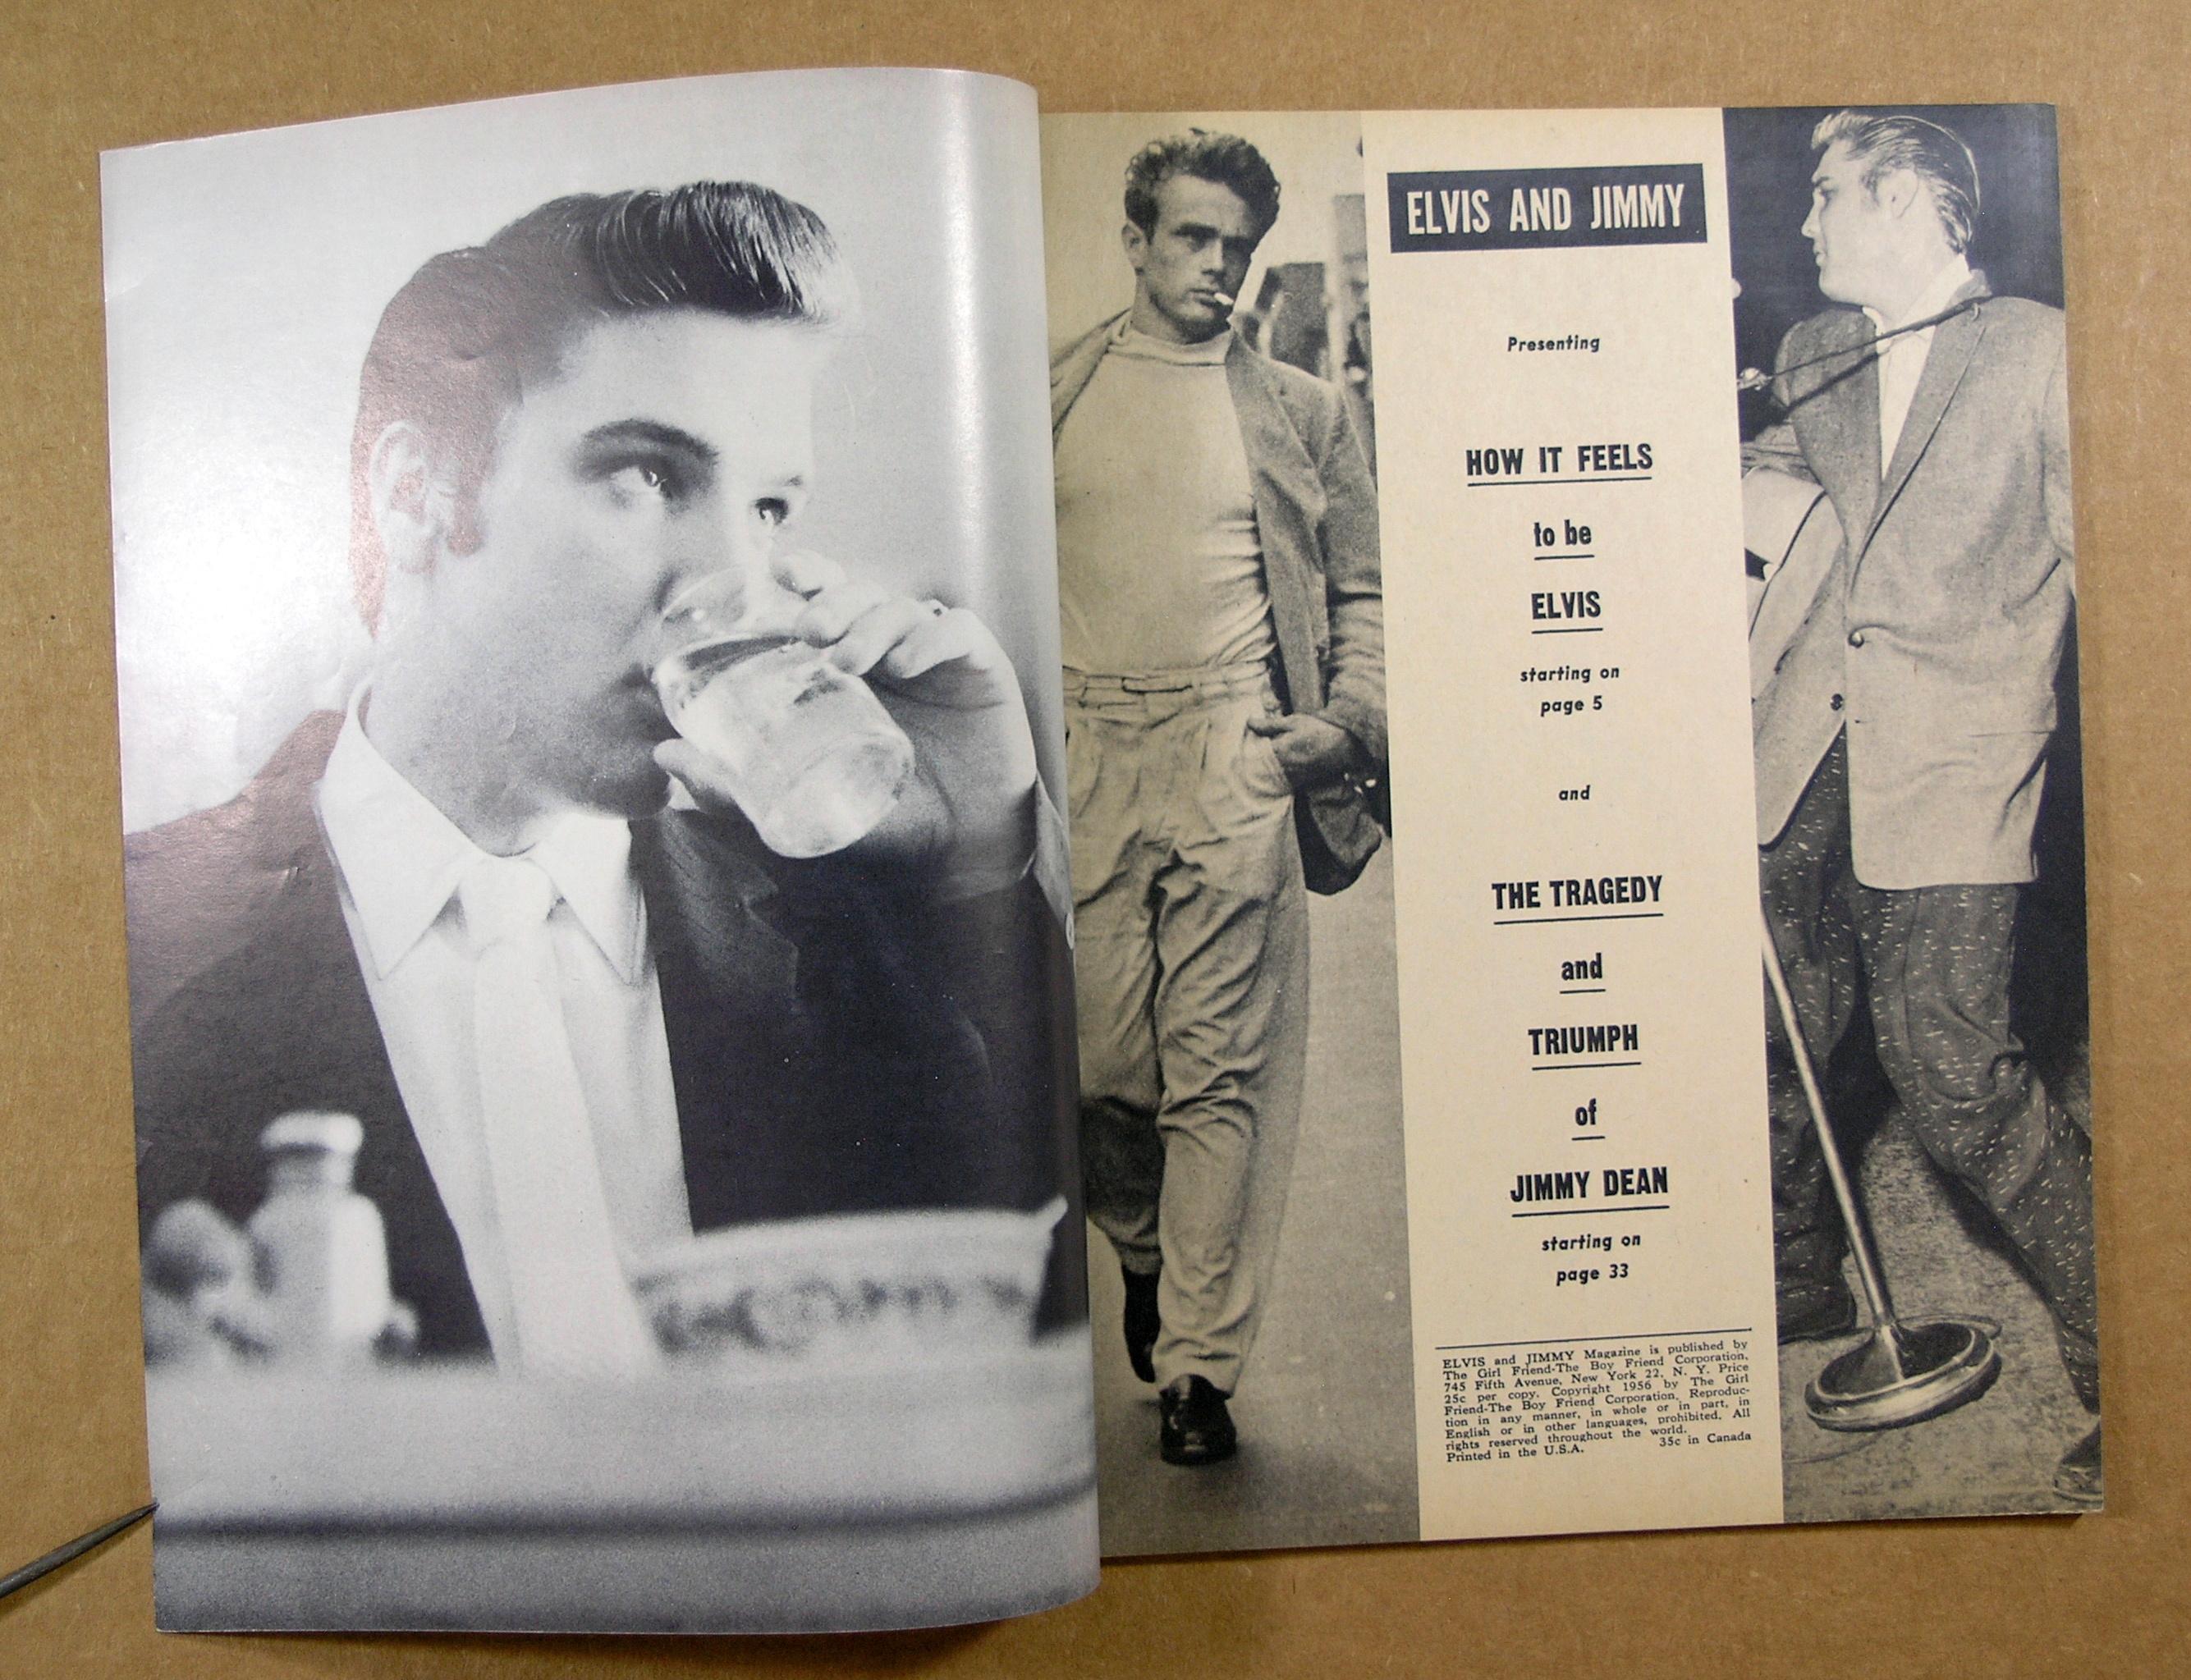 1956 "Elvis and Jimmy" James Dean Magazine.  Nice condition.  Great cover.